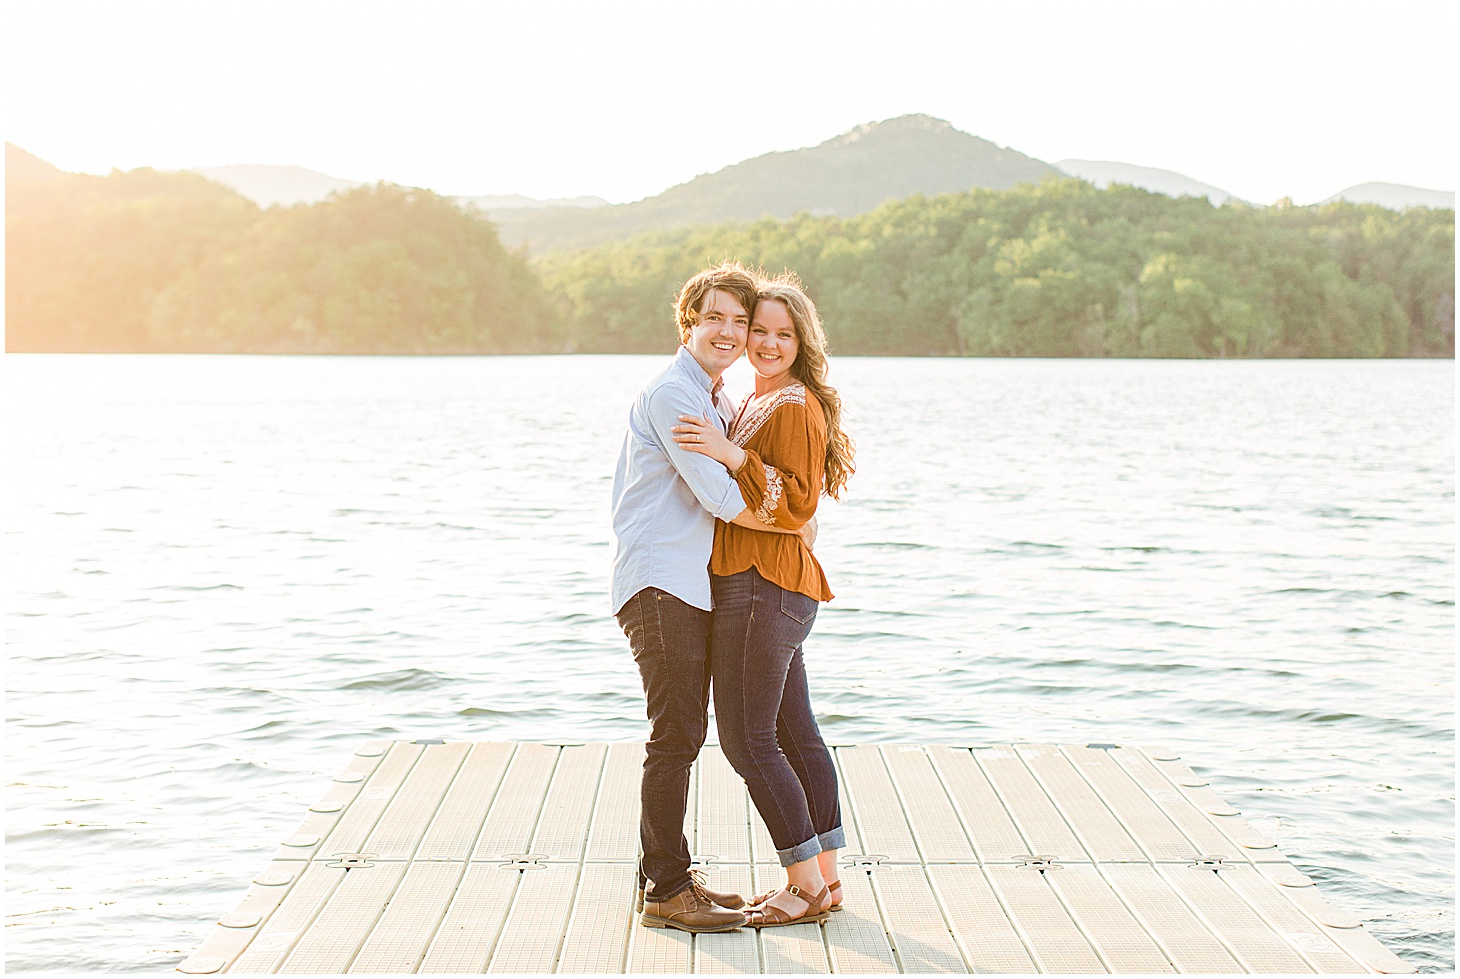 carvinscoveengagementsession_roanokeengagementsession_carvinscove_virginiawedding_virginiaweddingphotographer_vaweddingphotographer_photo_0034.jpg